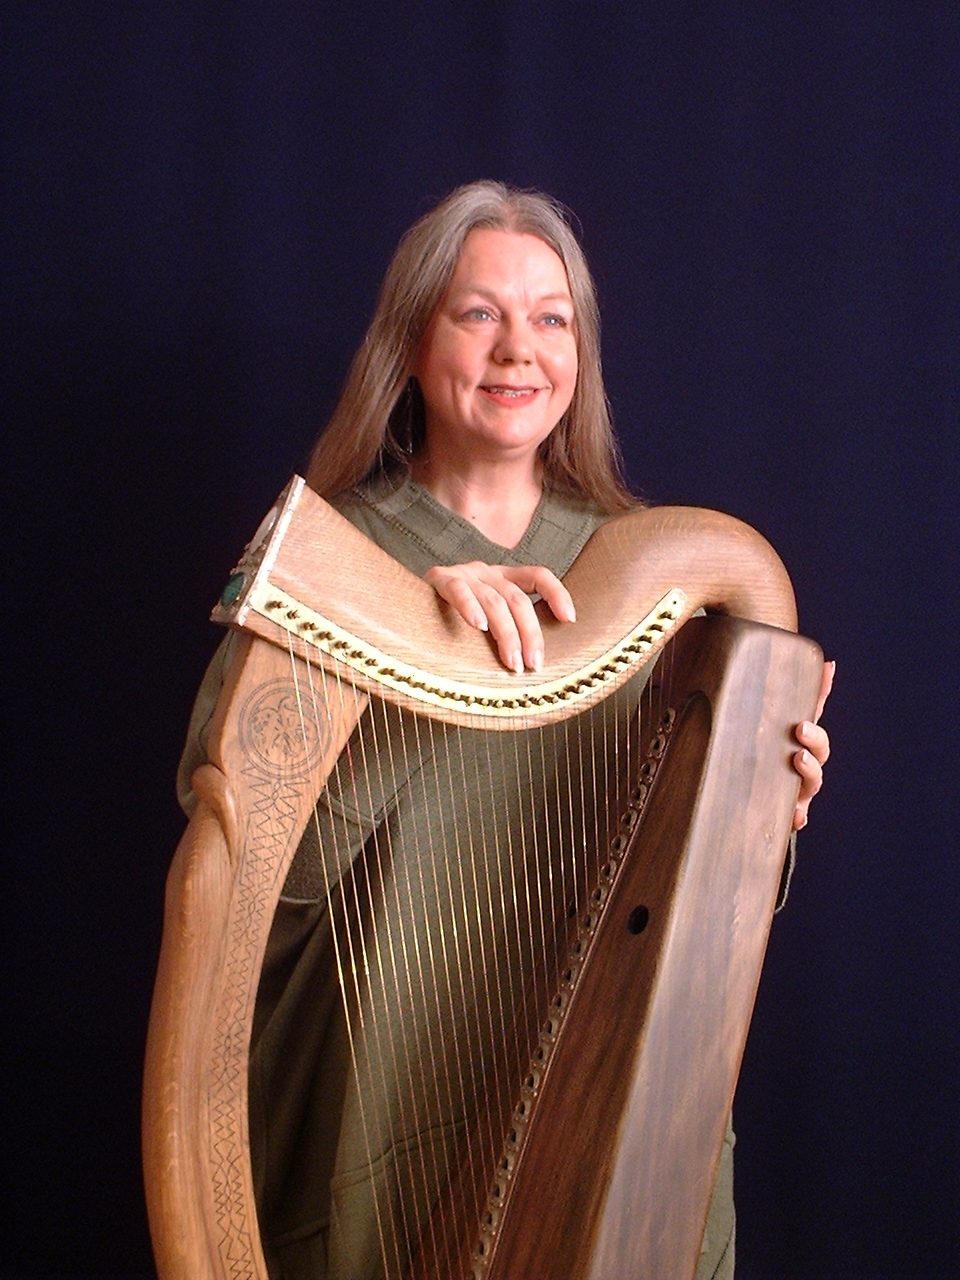 Early Irish Harp Concerts in Kilkenny, Galway and Dublin